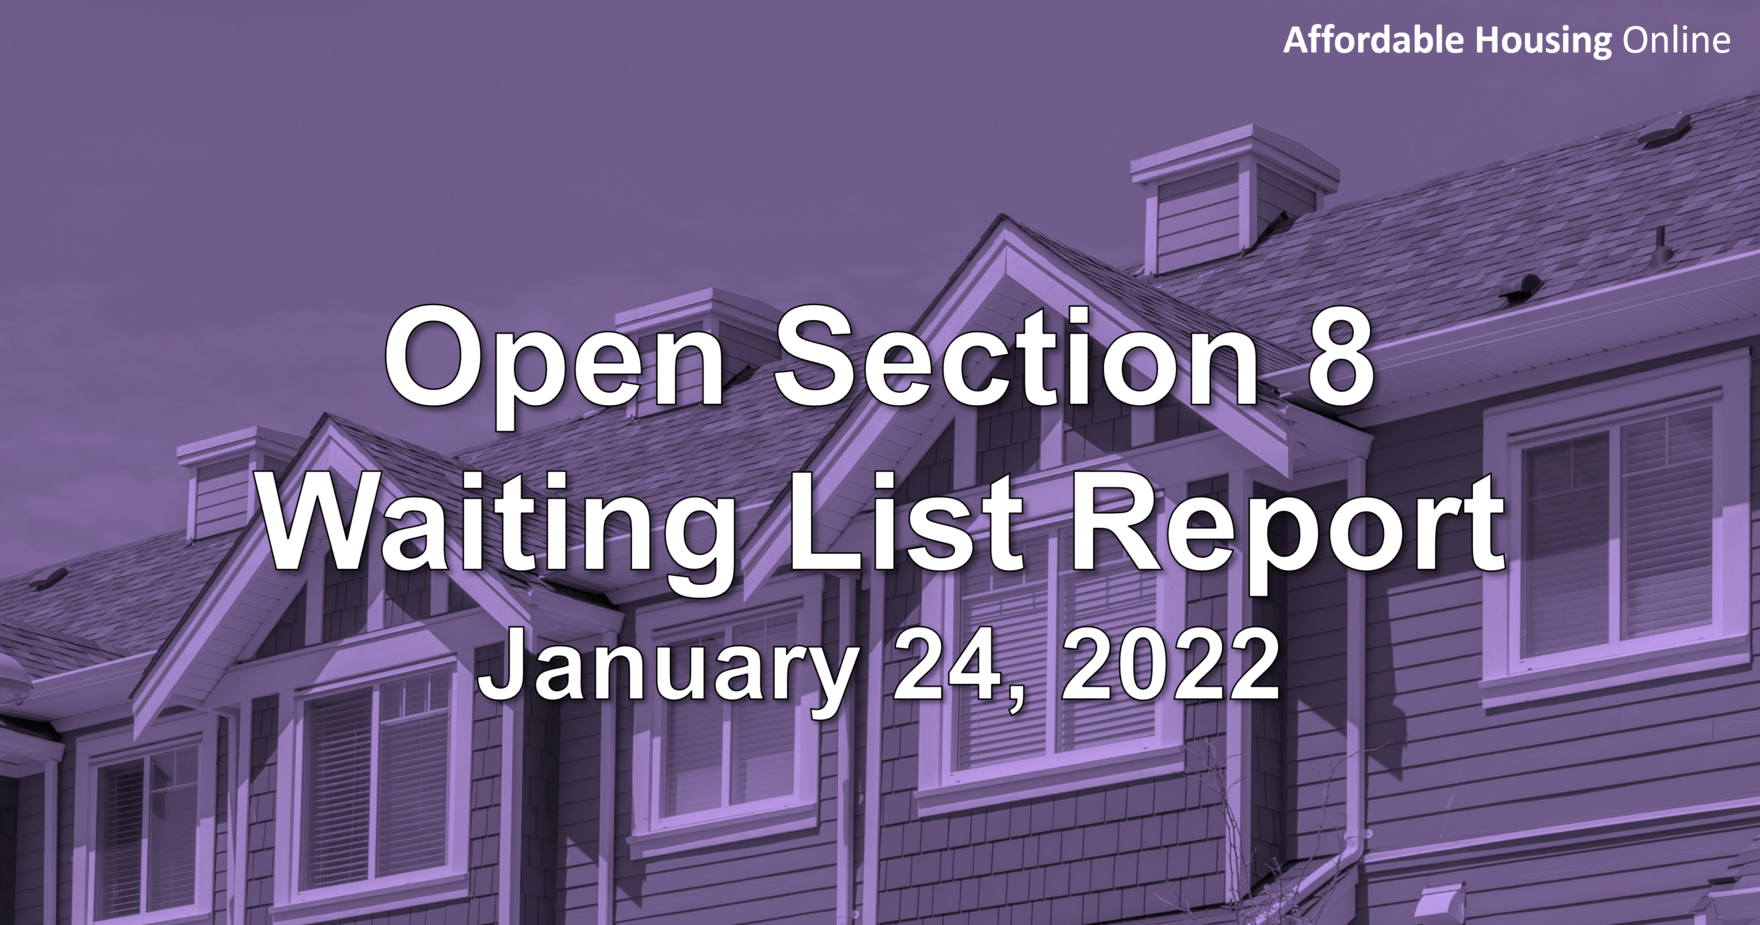 Open Section 8 Waiting List Report: January 24, 2022